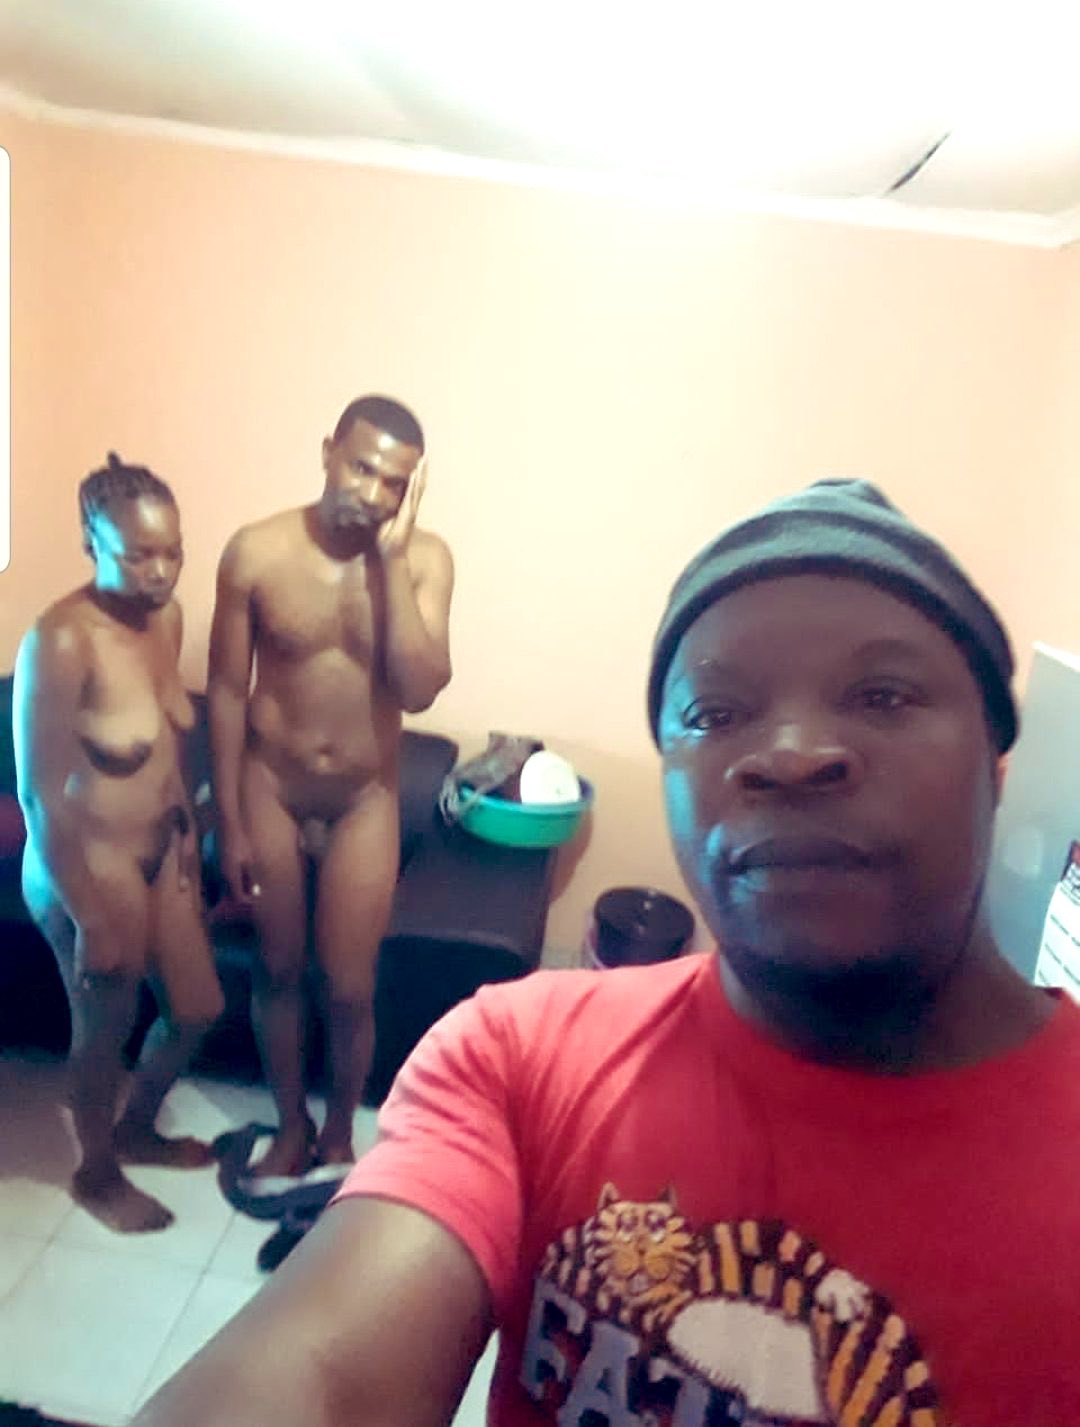 man caught wife and his friend having sex, Took Selfie pic